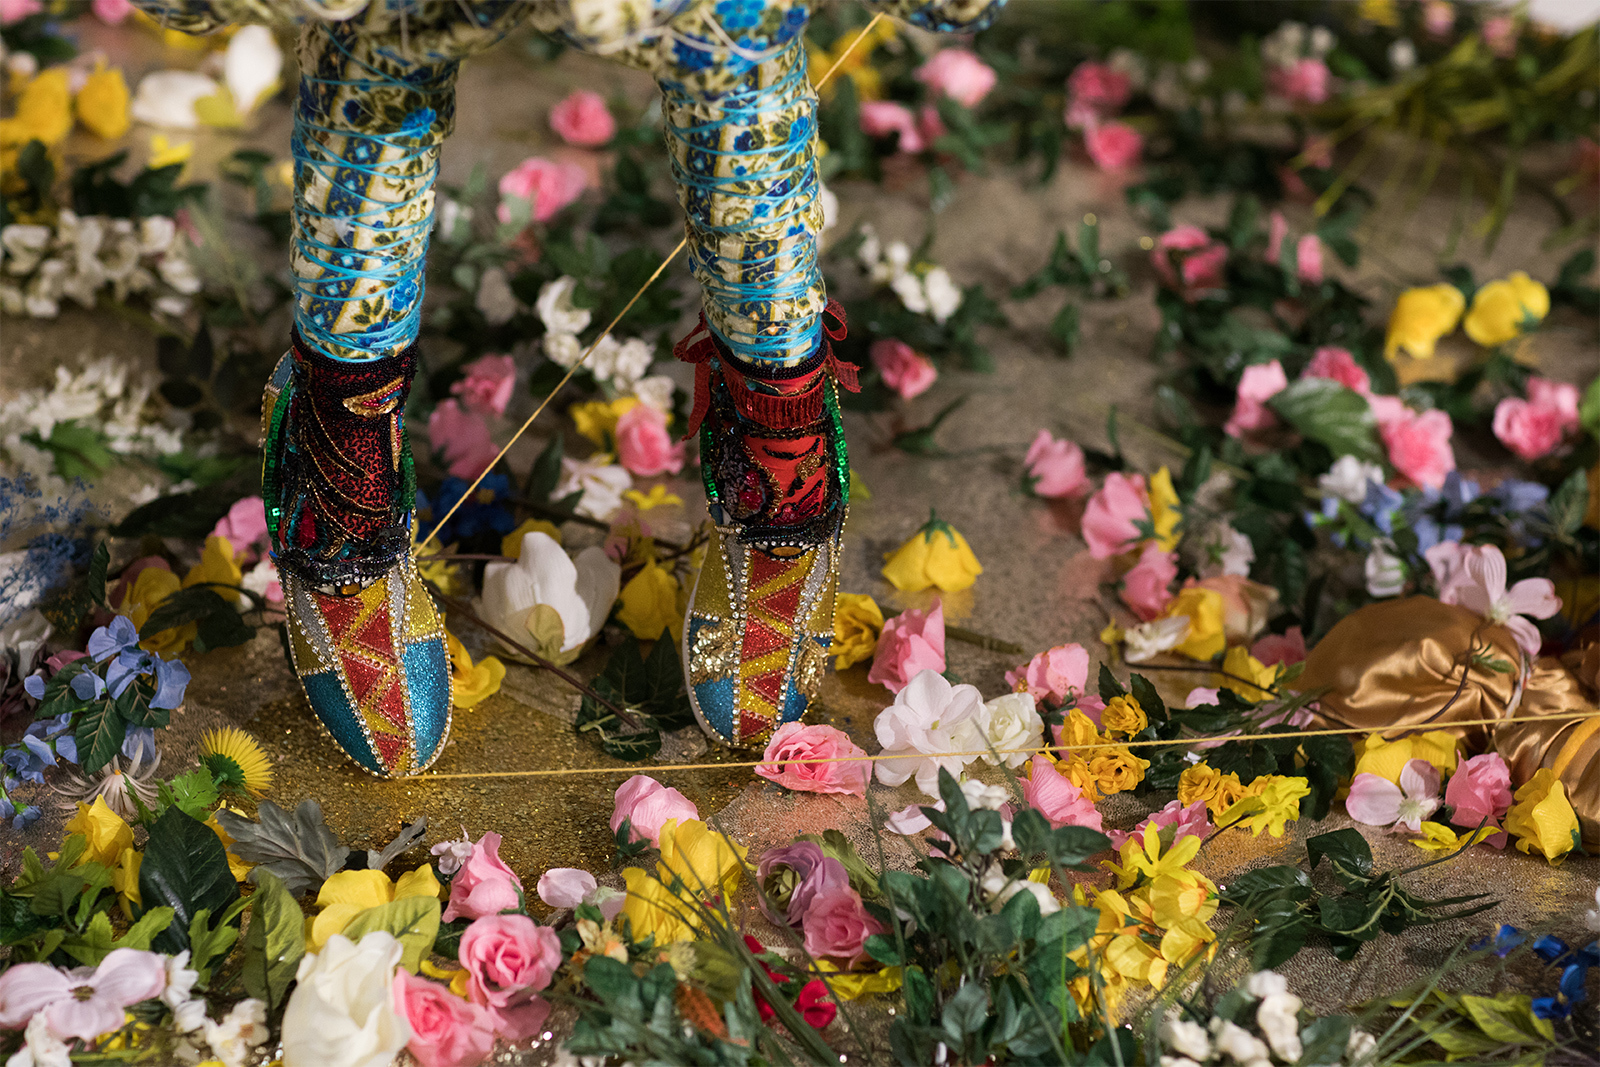 Vanessa German - Detail of a the feet of a figure, standing on a bed of artificial flowers, wearing pointed sequined shoes.